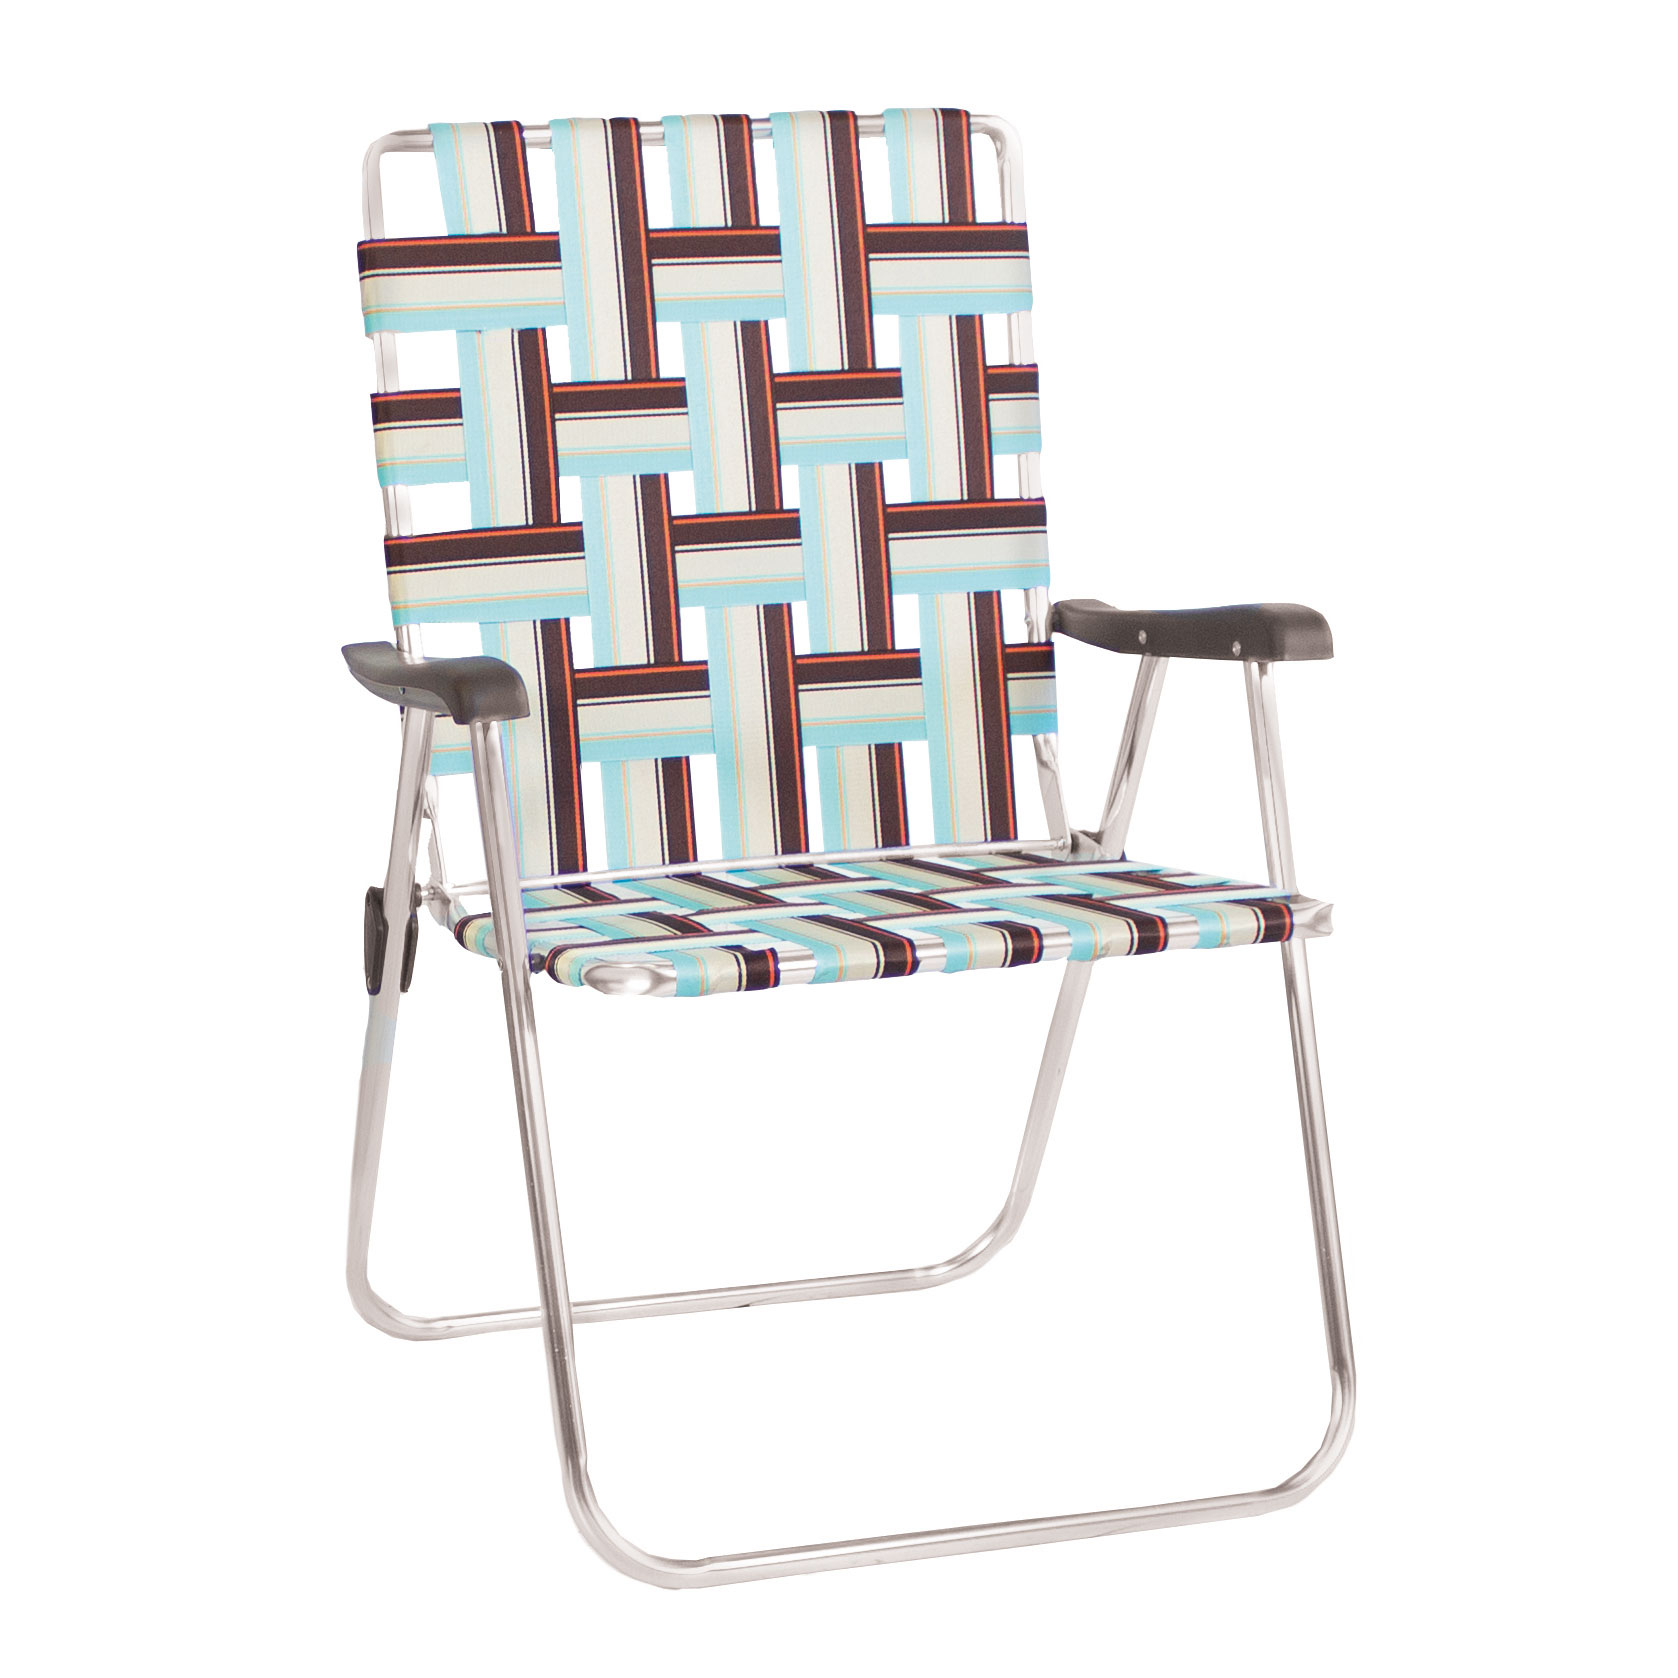 Fezz Backtrack Chair Teal/Brown